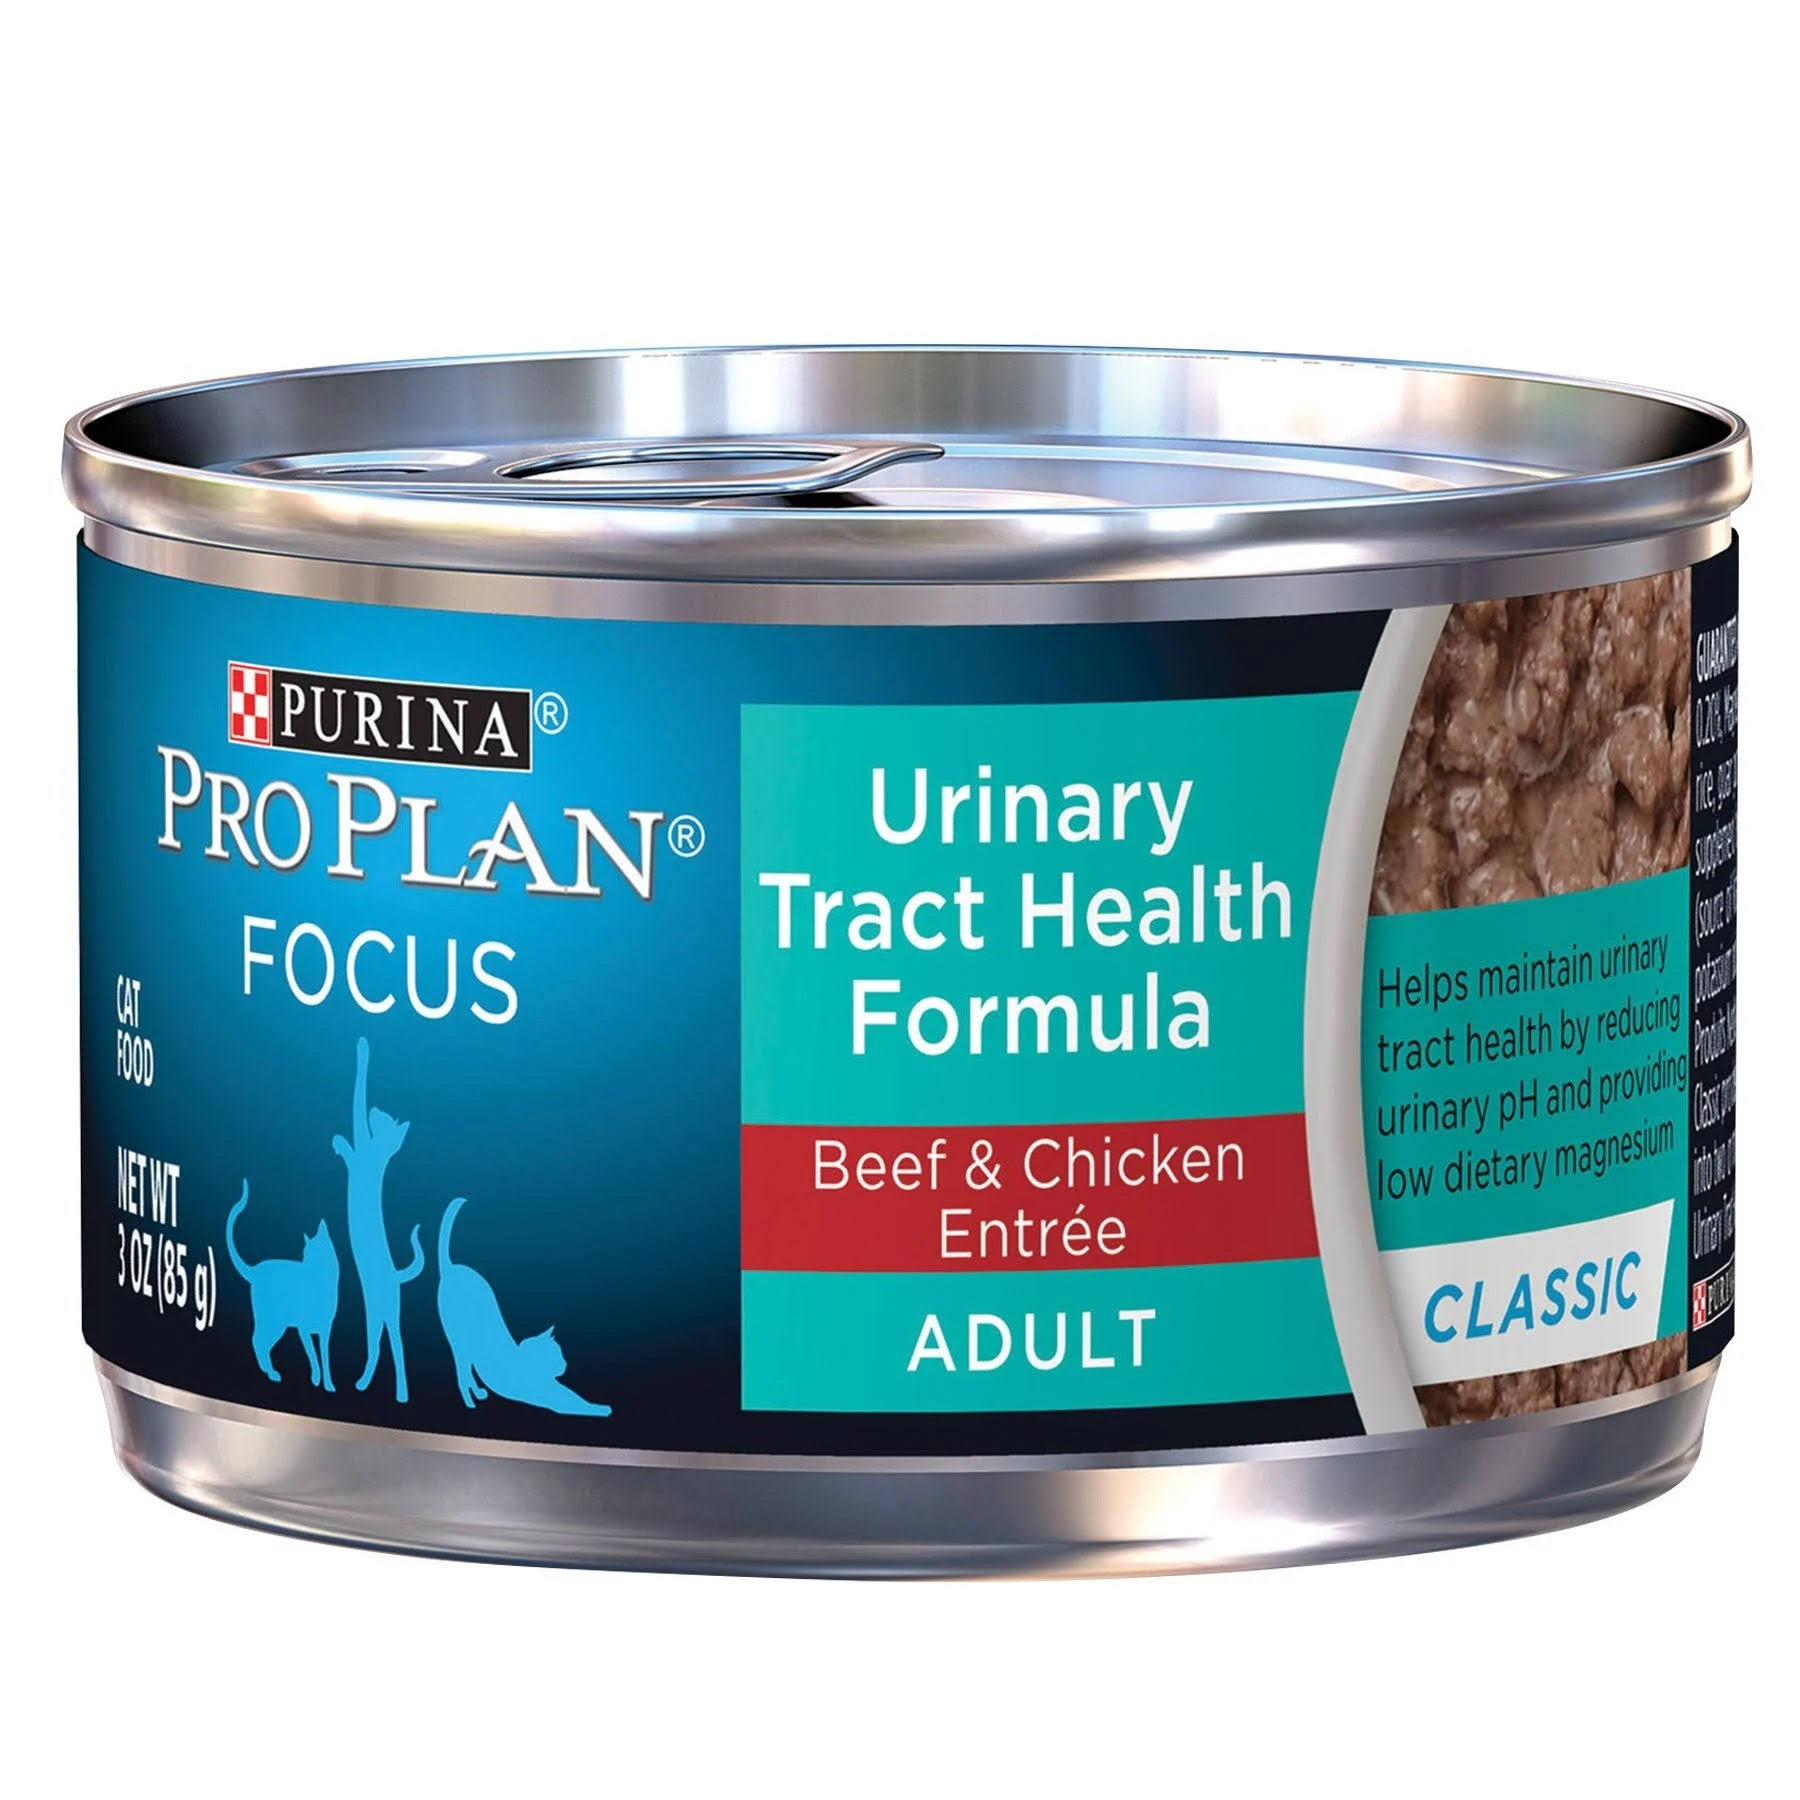 Purina Focus Adult Urinary Tract Health Formula - Beef and Chicken Entrée, 5oz